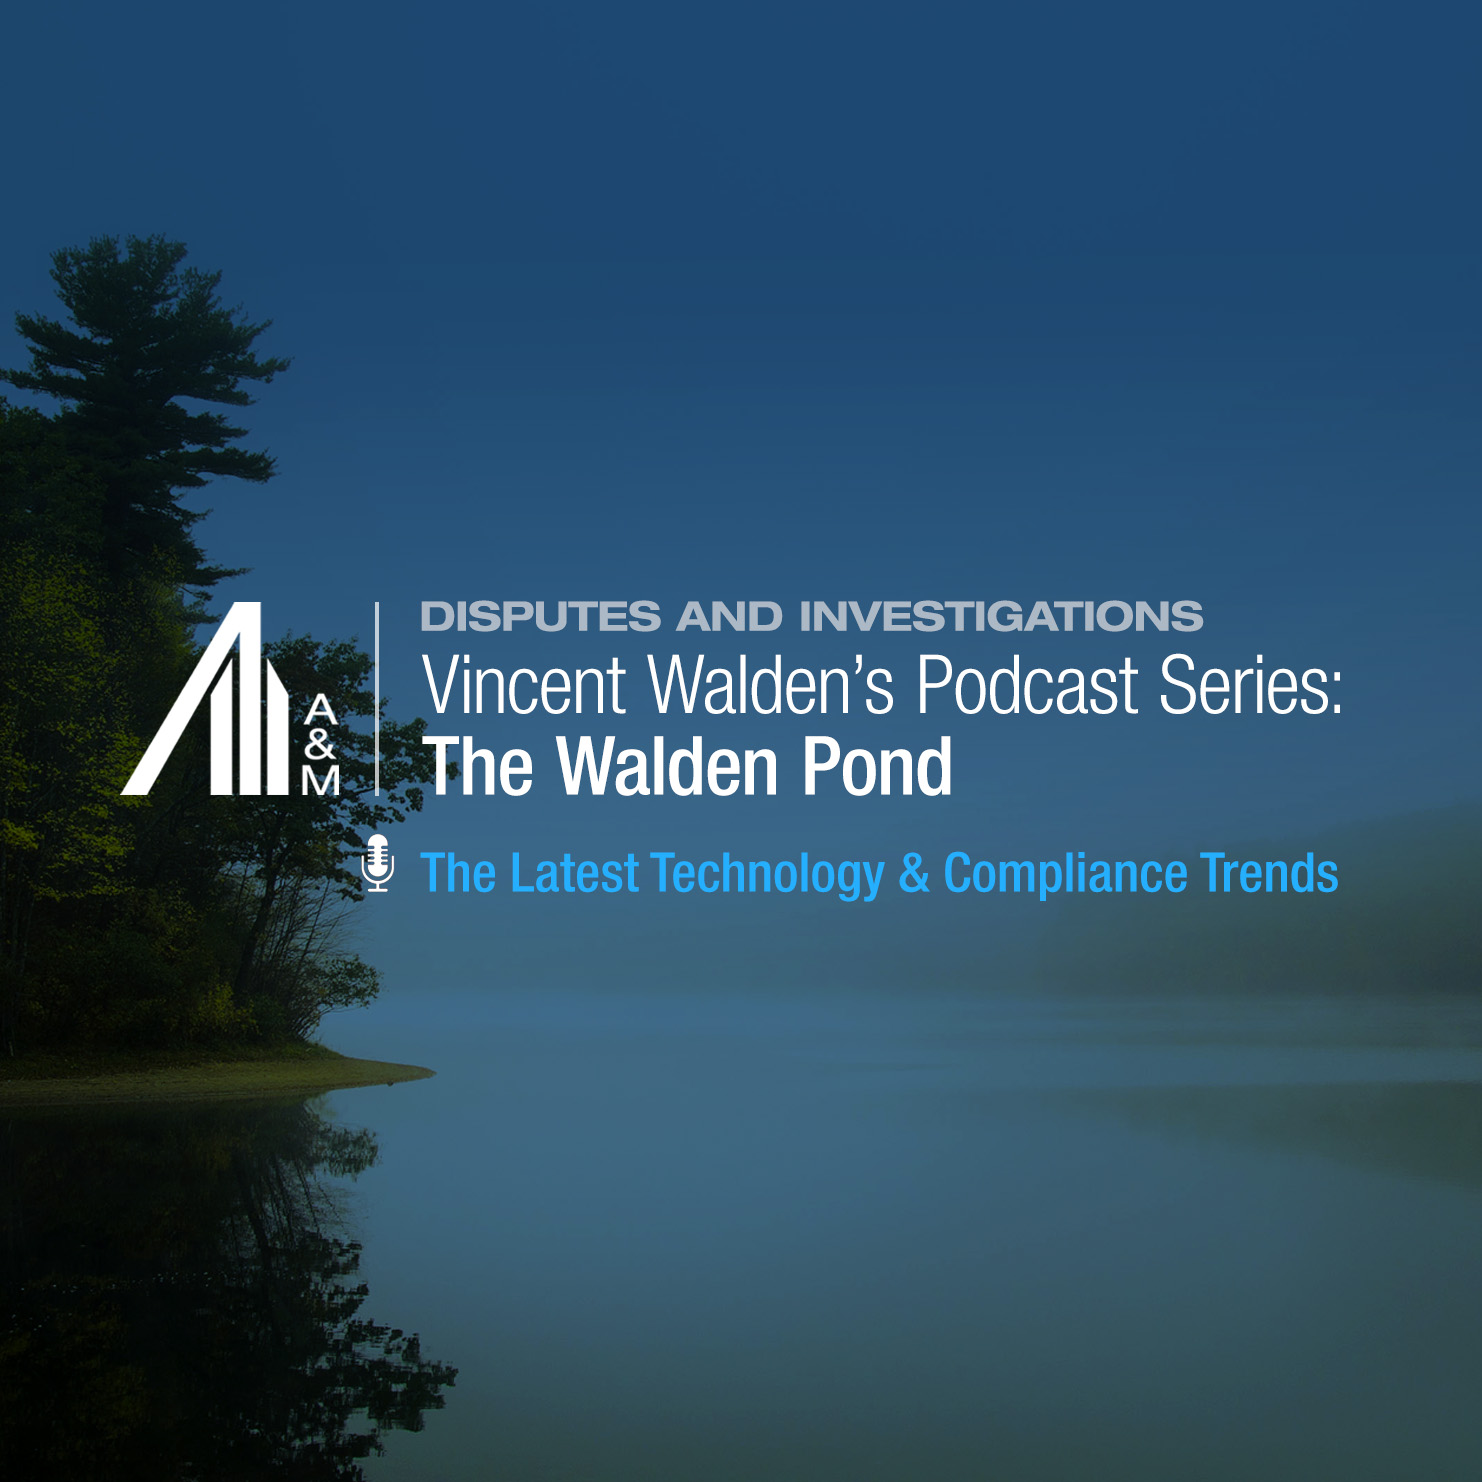 Walden Pond Podcast: Regulatory and Compliance Risks to Consider in 2021